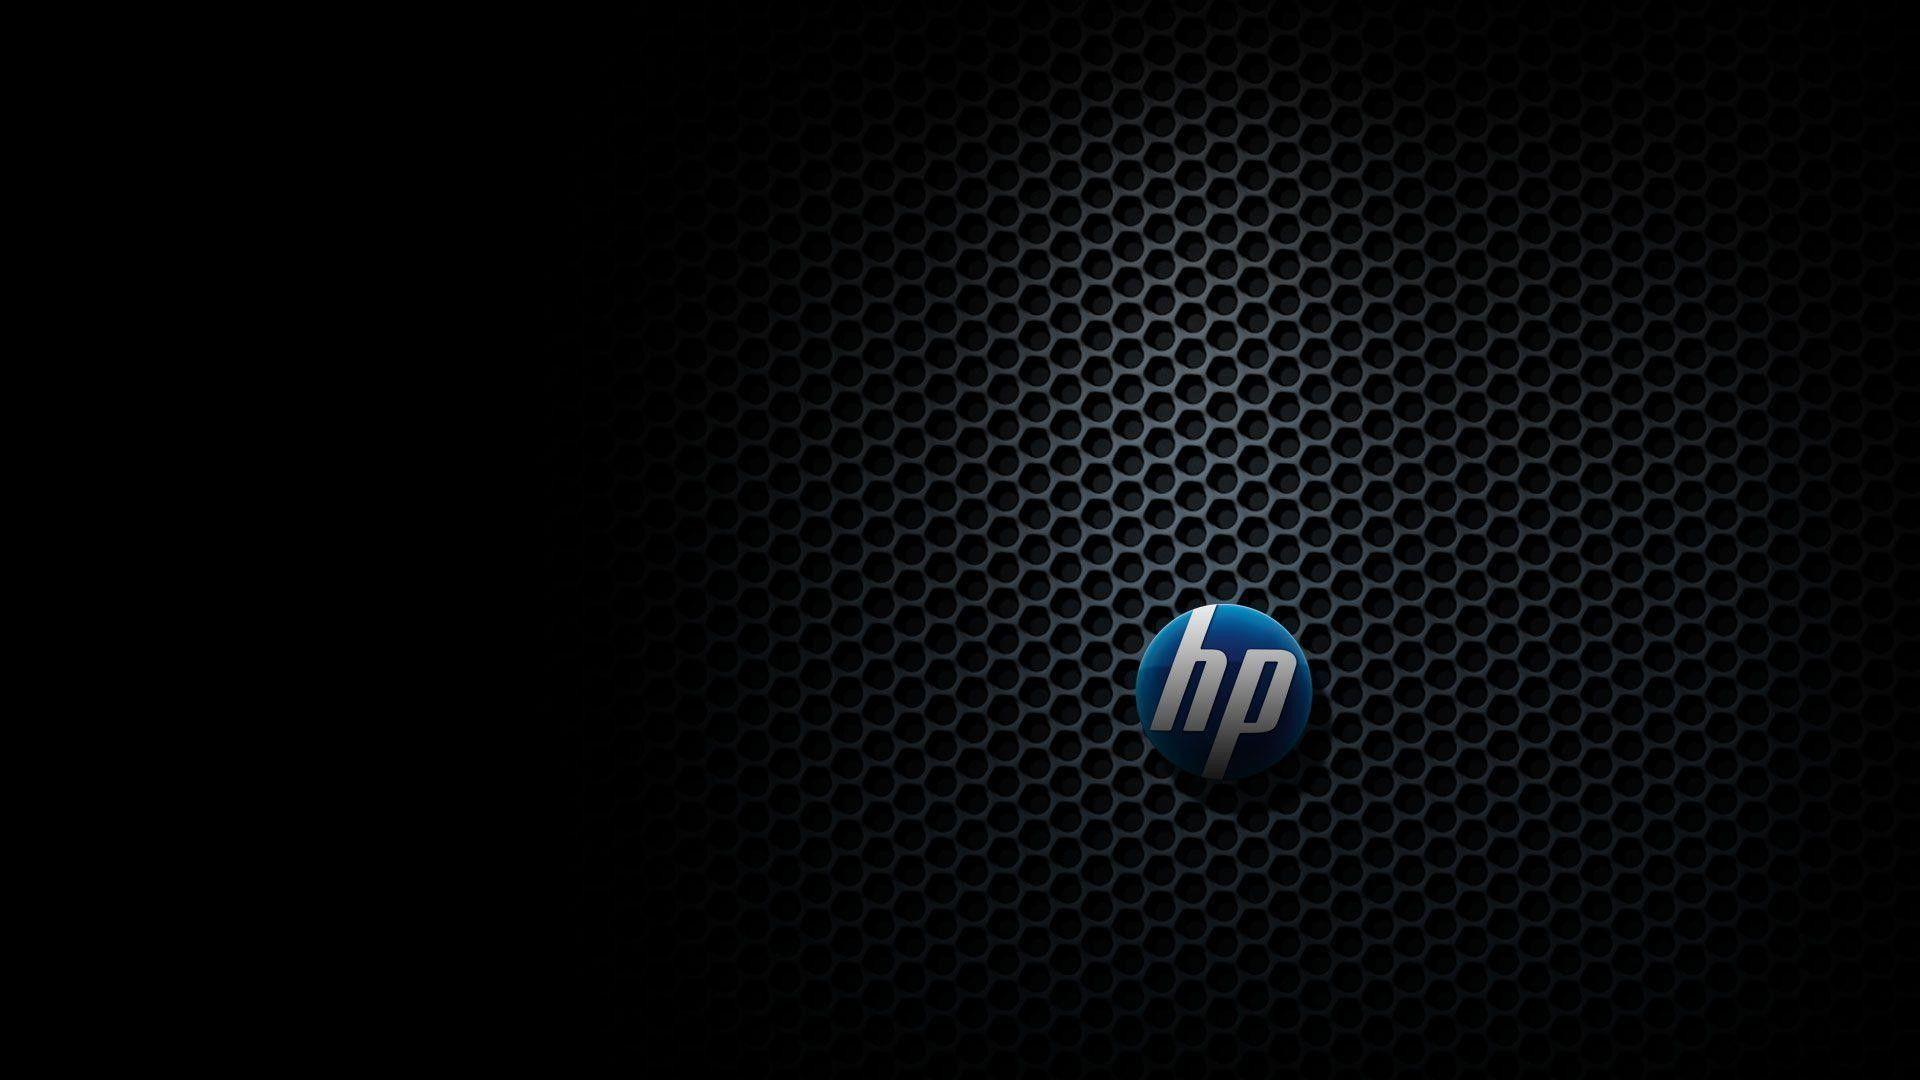 HP Laptop Wallpapers - Top Free HP Laptop Backgrounds - WallpaperAccess